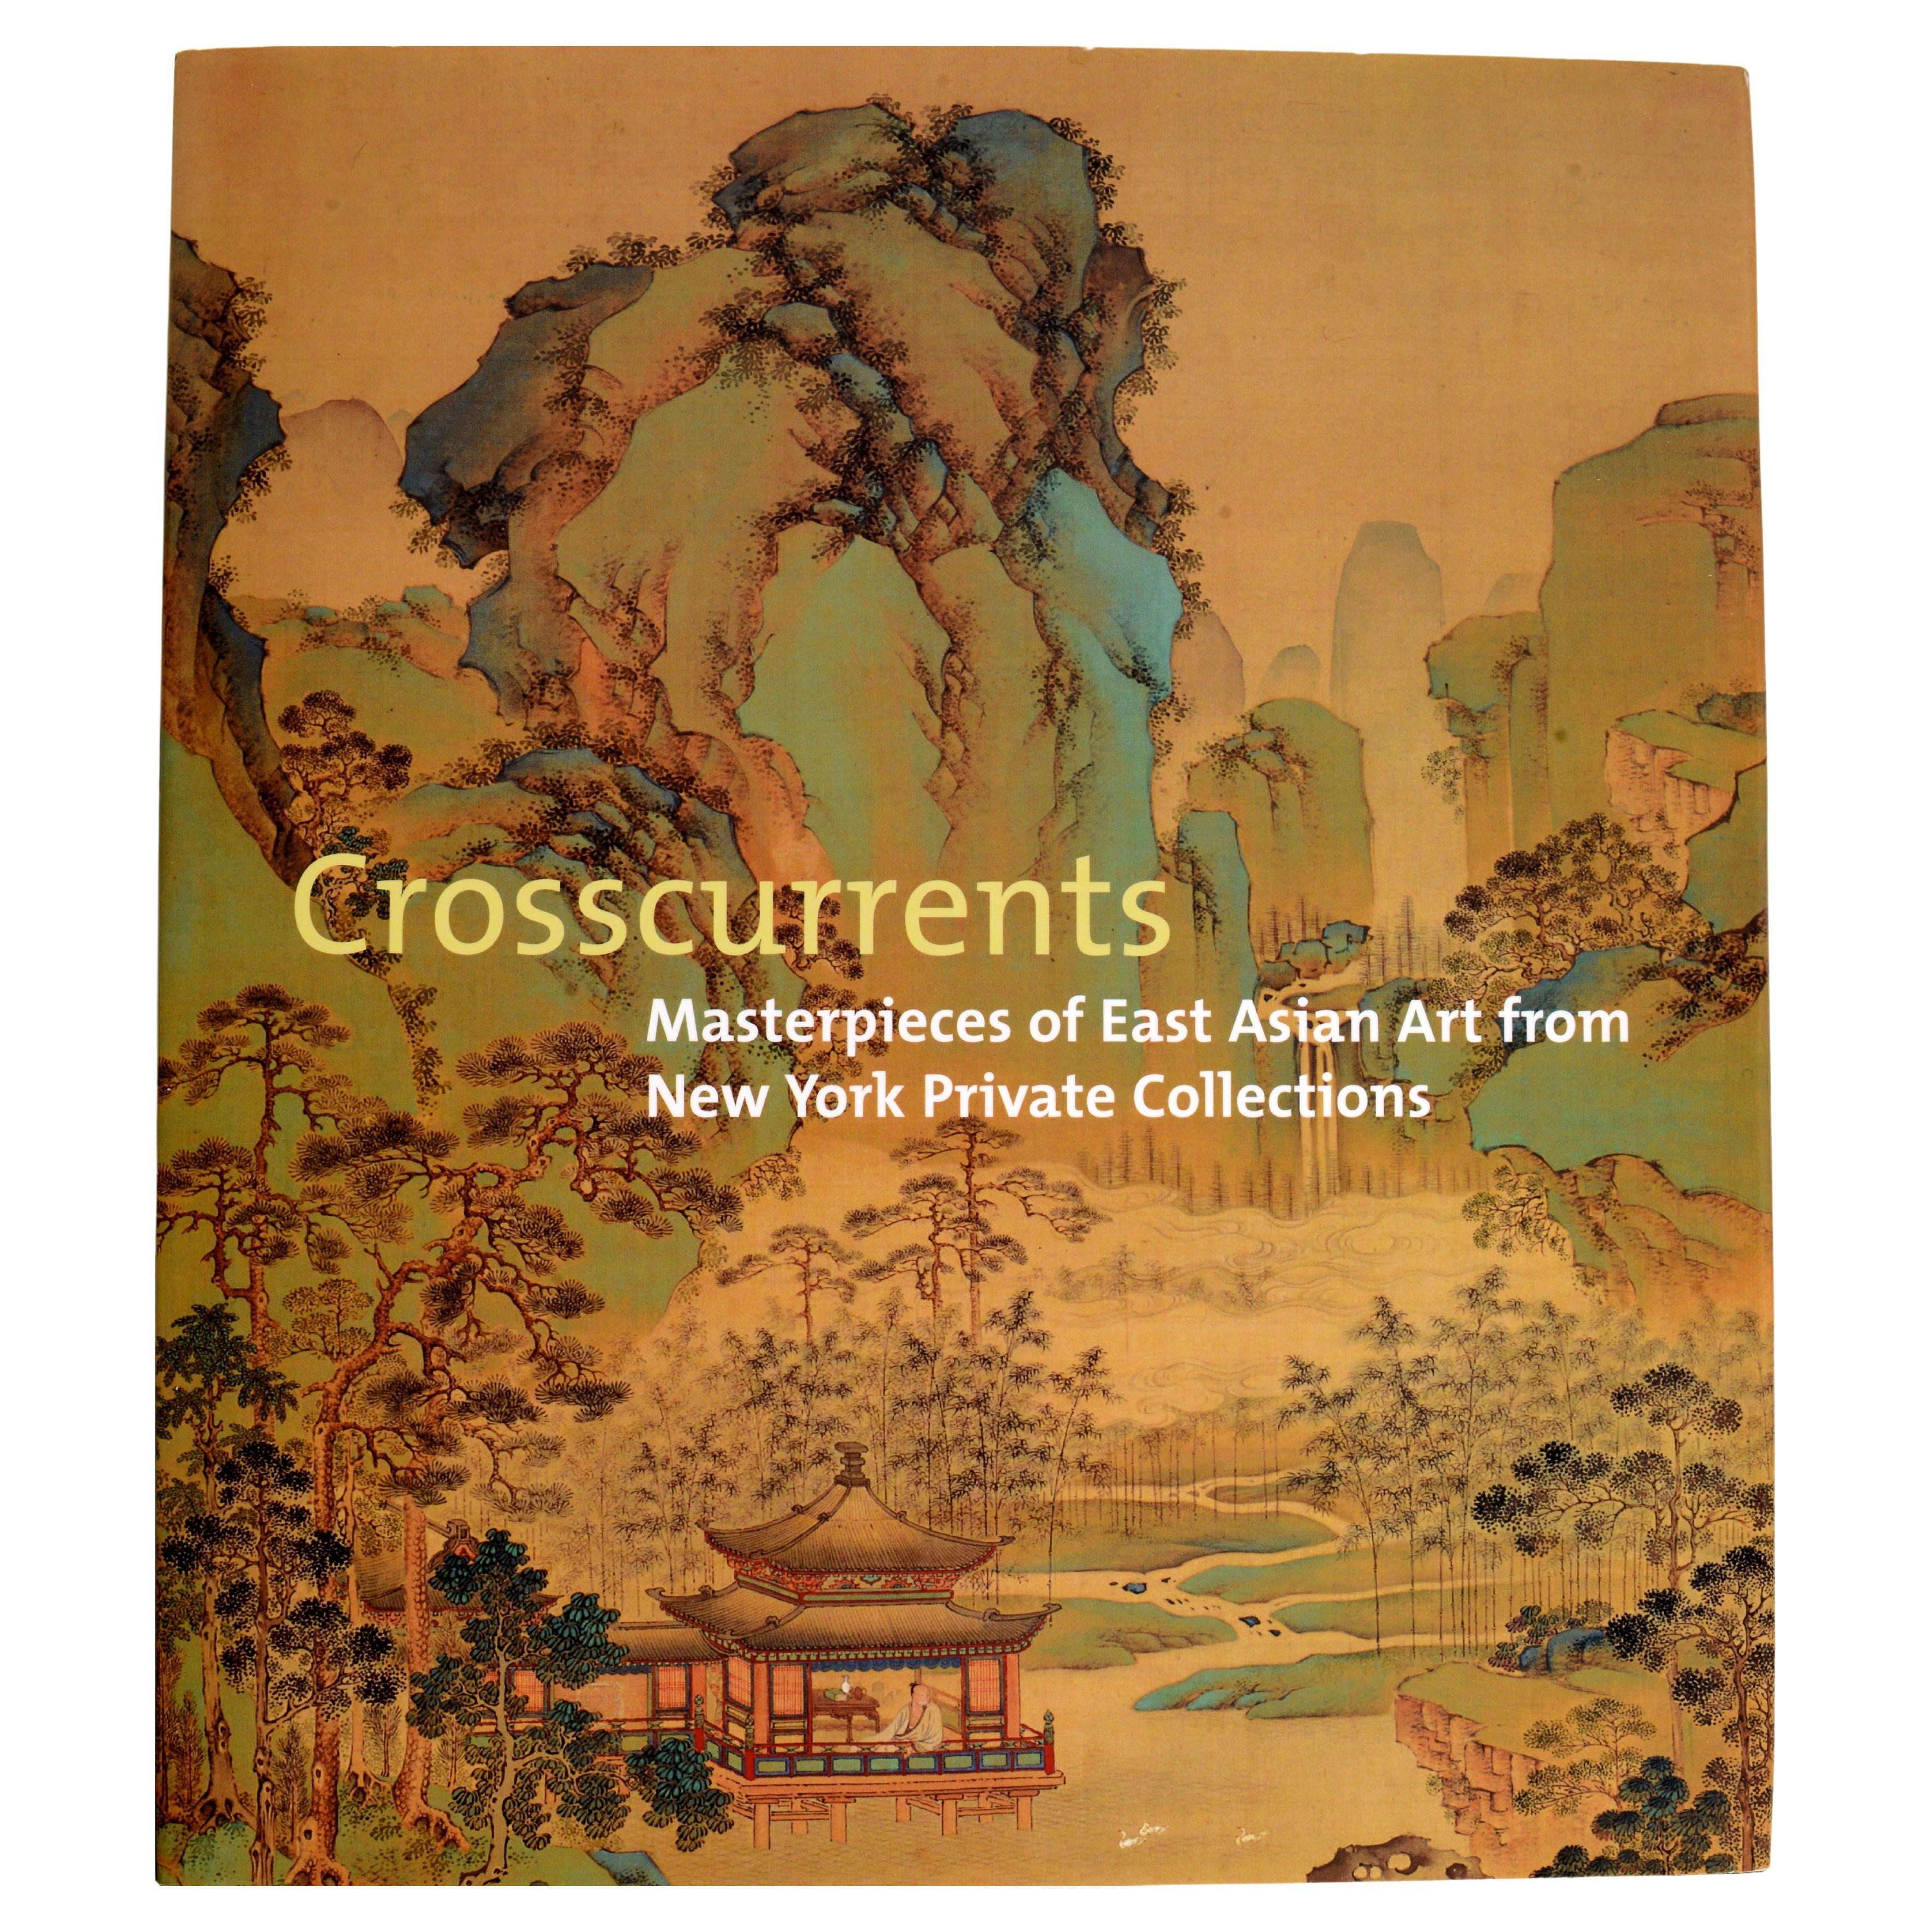 Crosscurrents: Masterpieces of East Asian Art from New York Private Collections